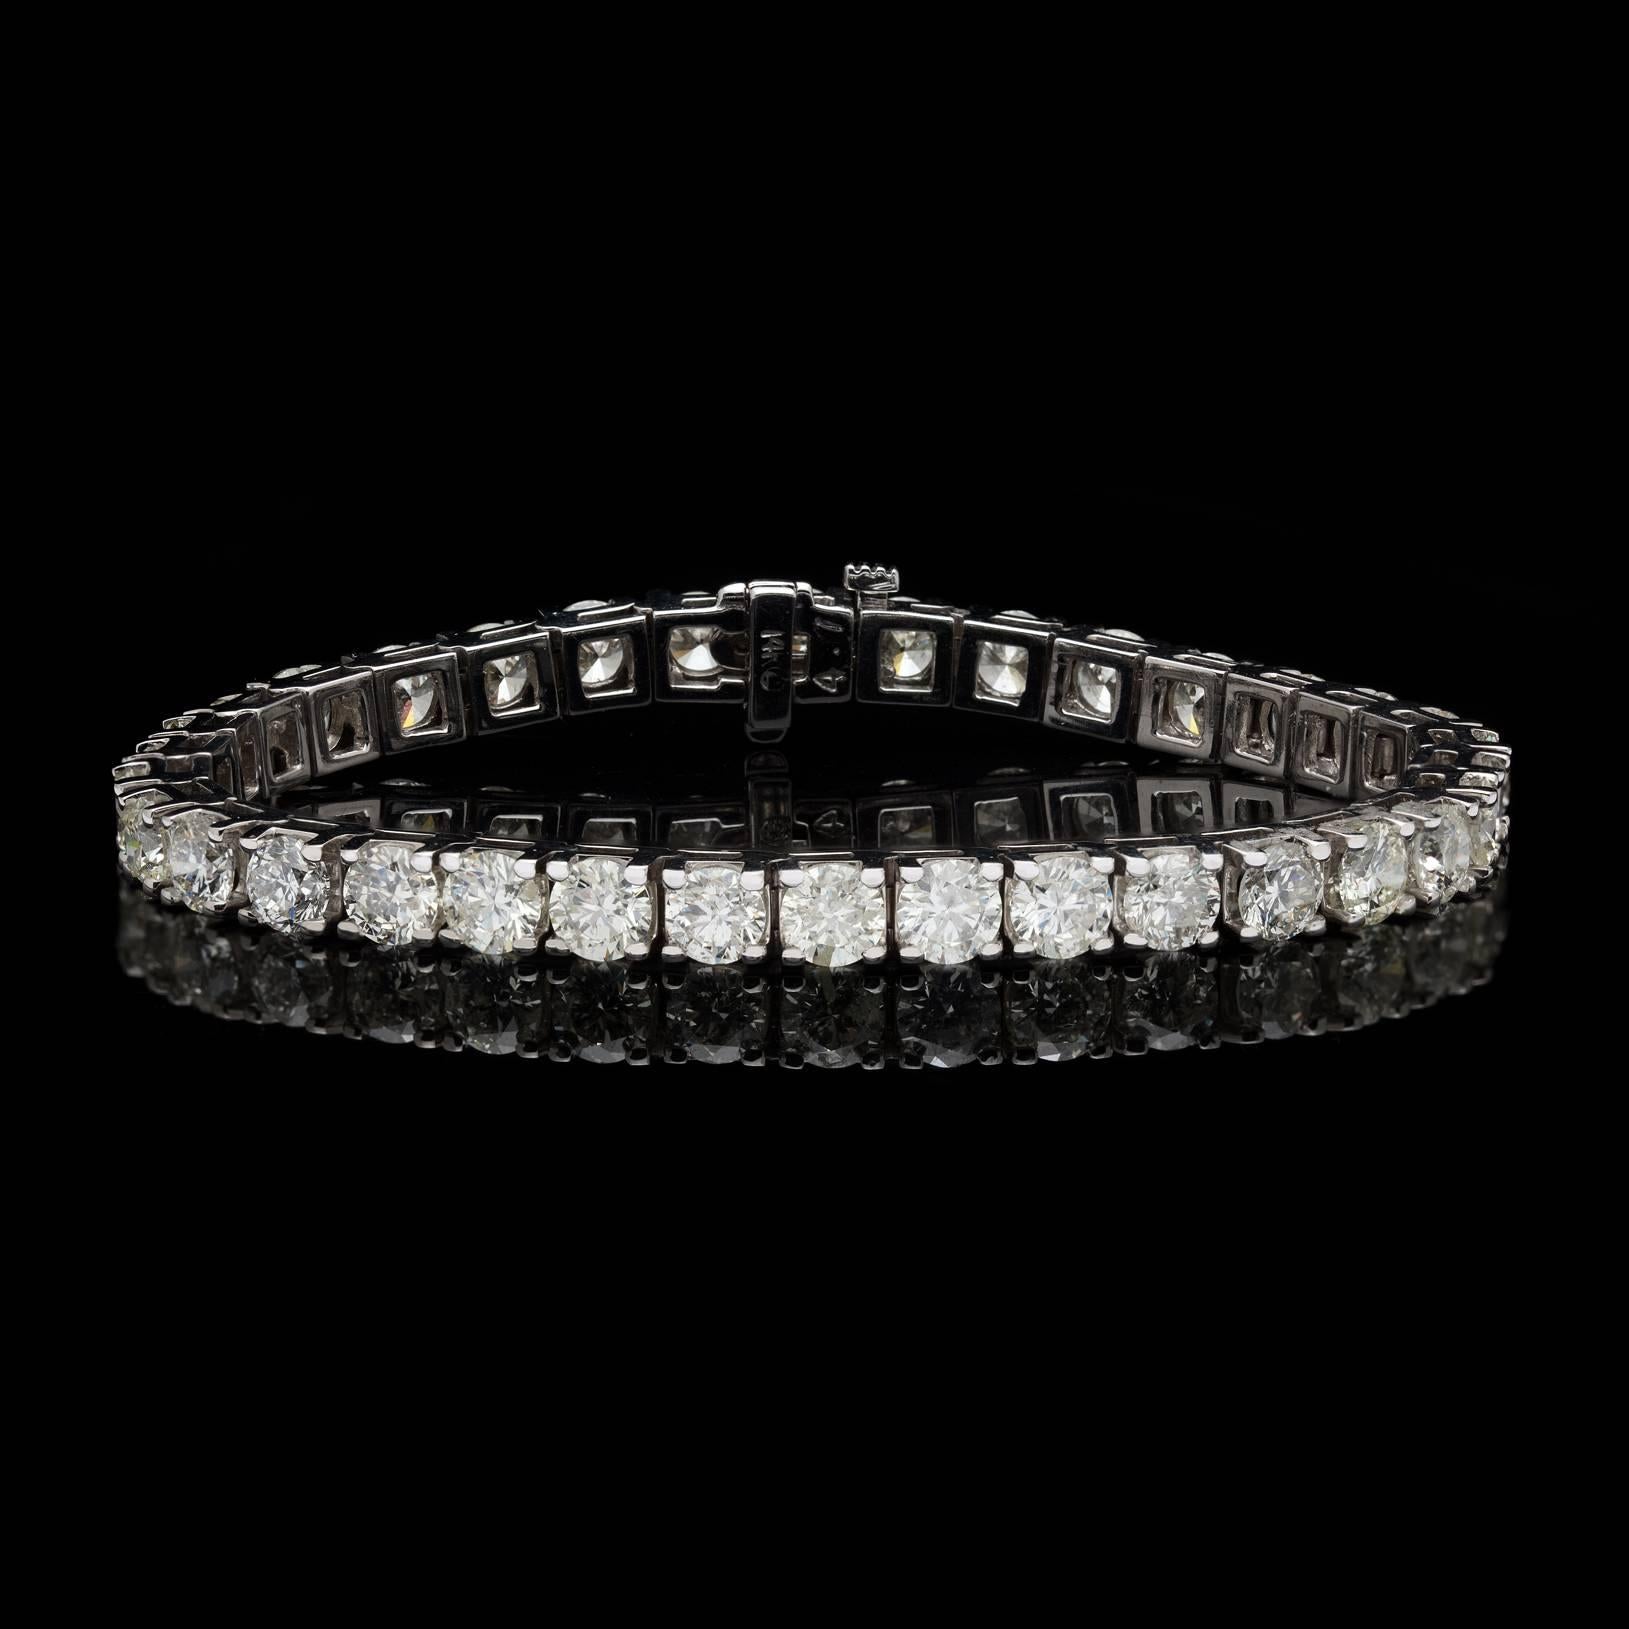 A must have accessory ever since Chris Evert stepped onto the court at the U.S. Open in 1987 dawning one of these beauties.  Featuring 34 Round Brilliant Cut Diamonds weighting a total of 13.70 carats, this 14 karat white gold stunner is sure to